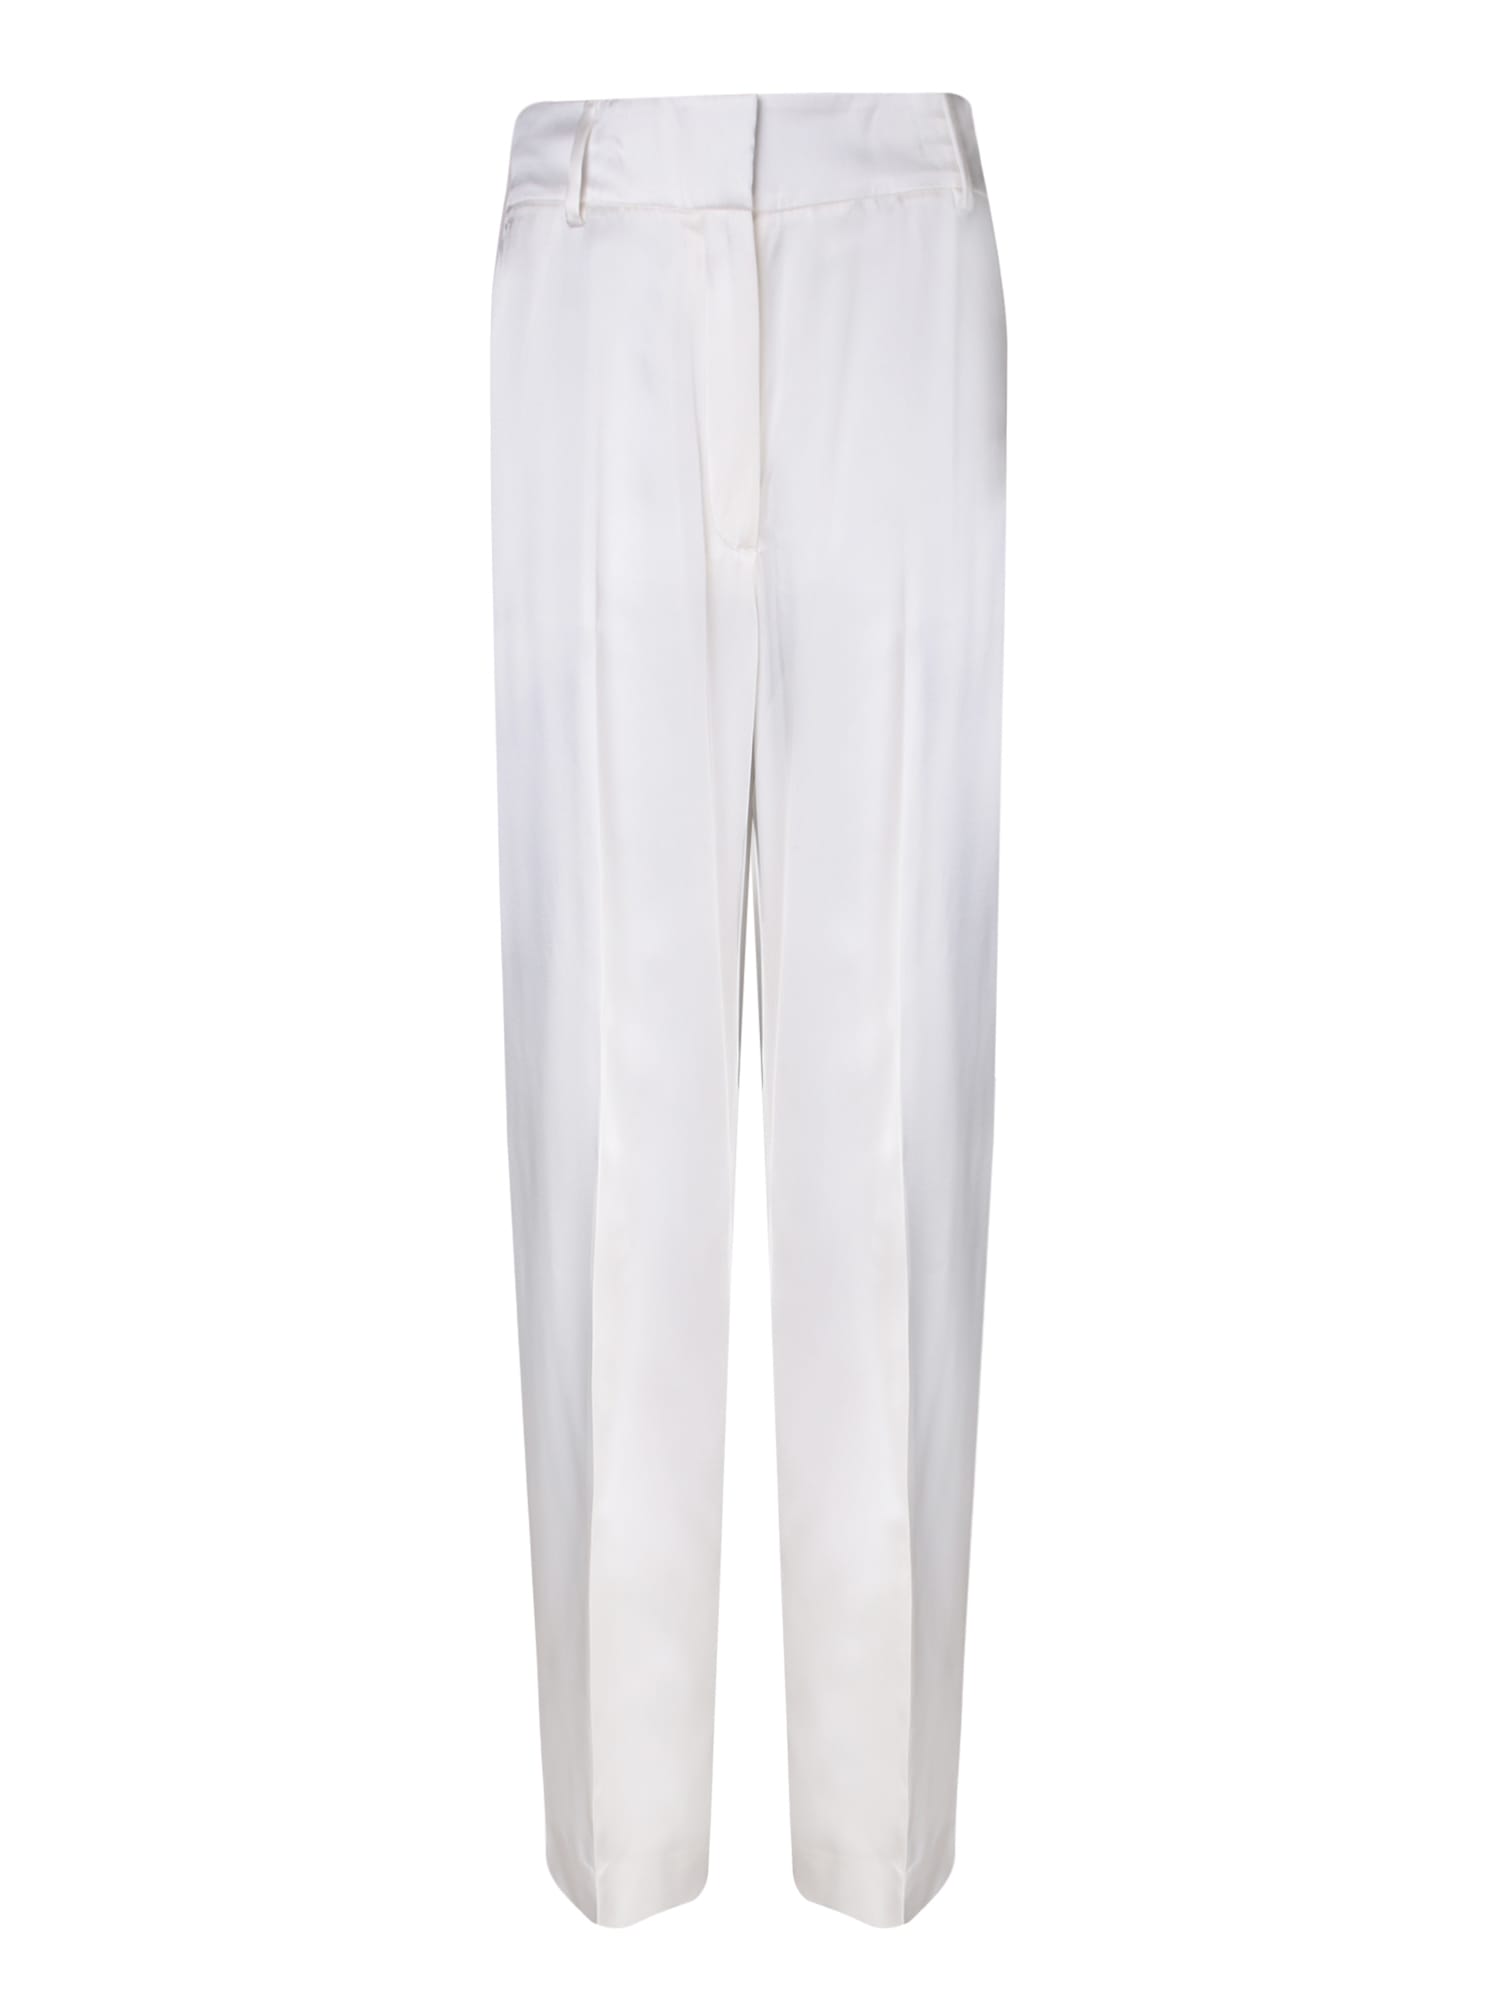 BURBERRY JANE WHITE TROUSERS